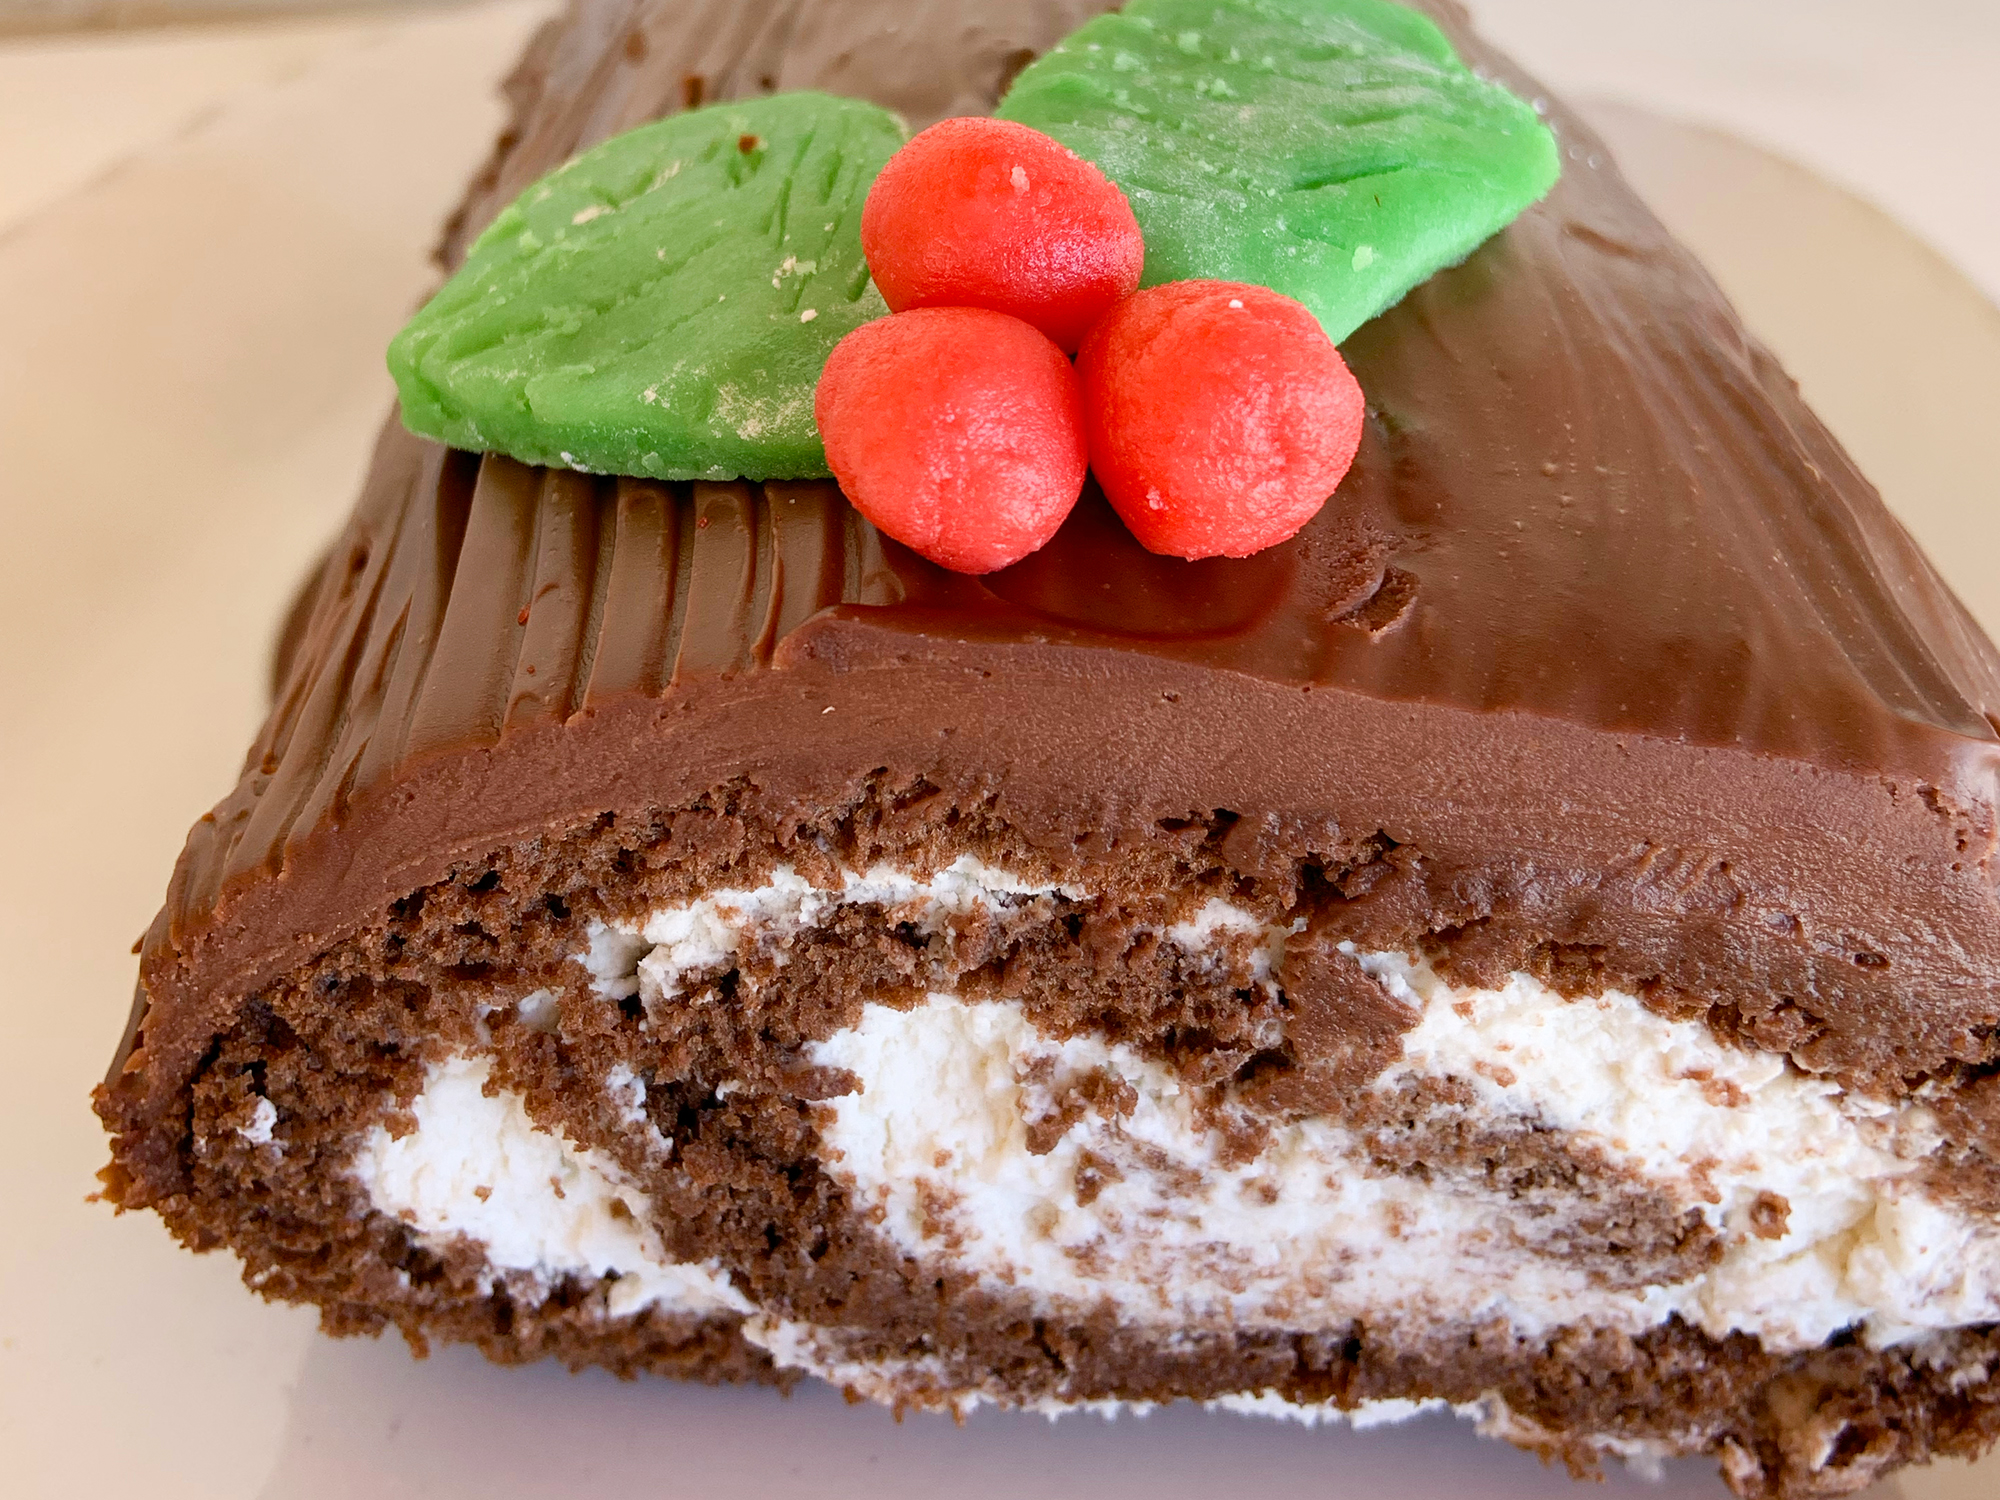 close up view of a Classic Yule Log cake with a white filling, garnished with brown icing and green and red marzipan